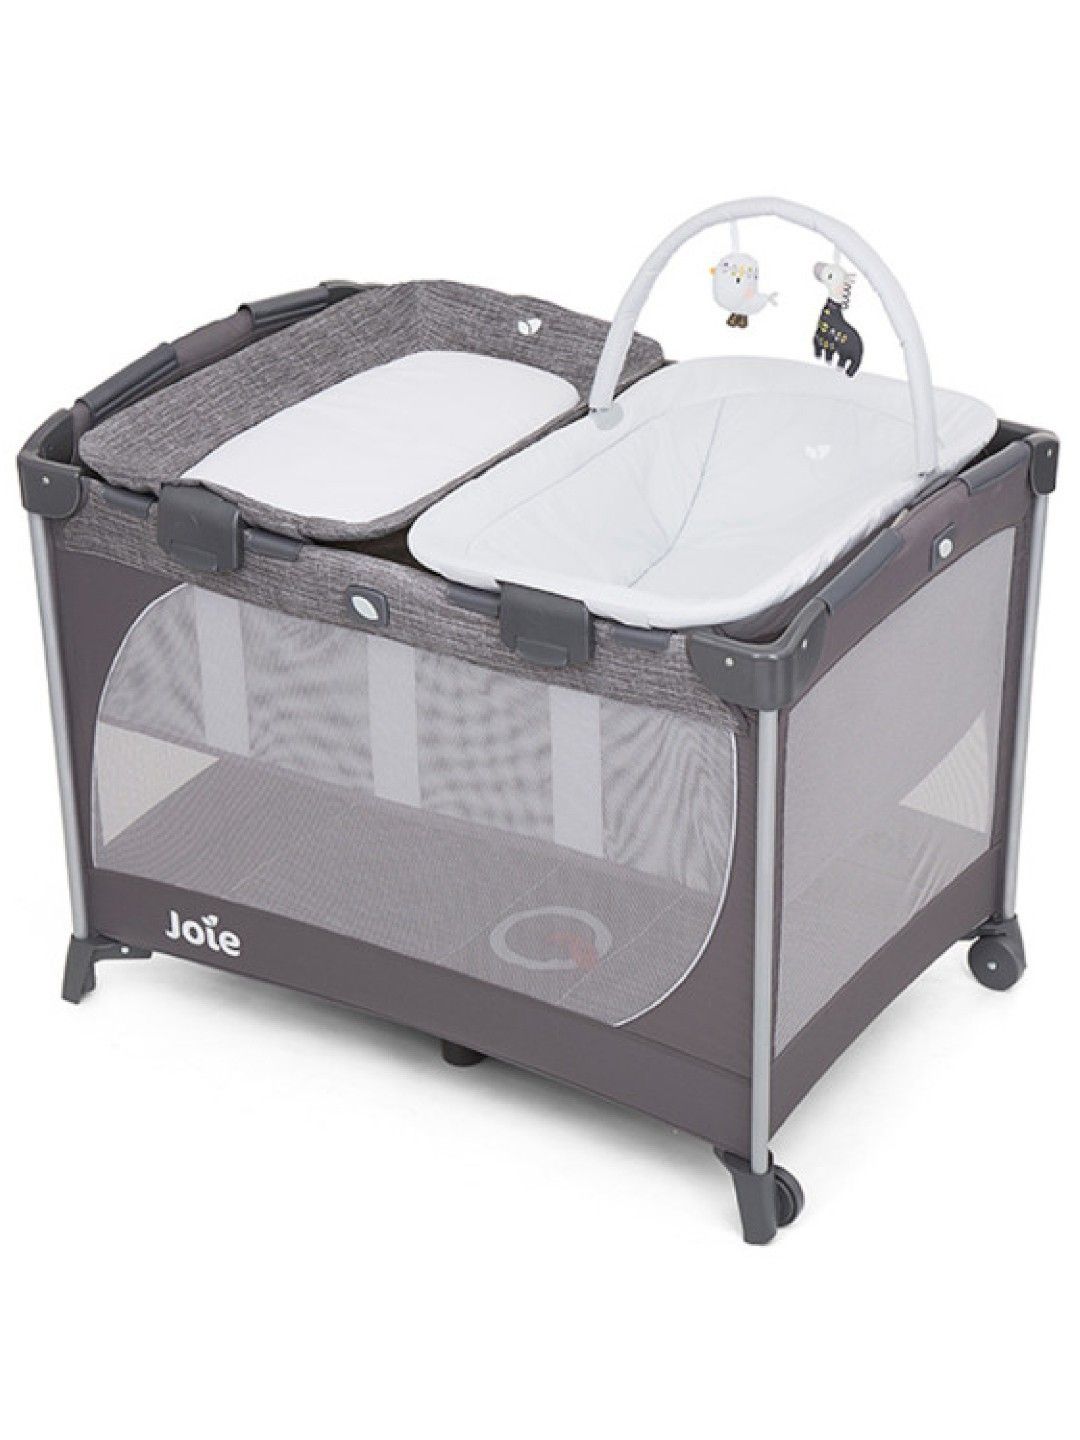 Joie Commuter Change and Snooze Playard